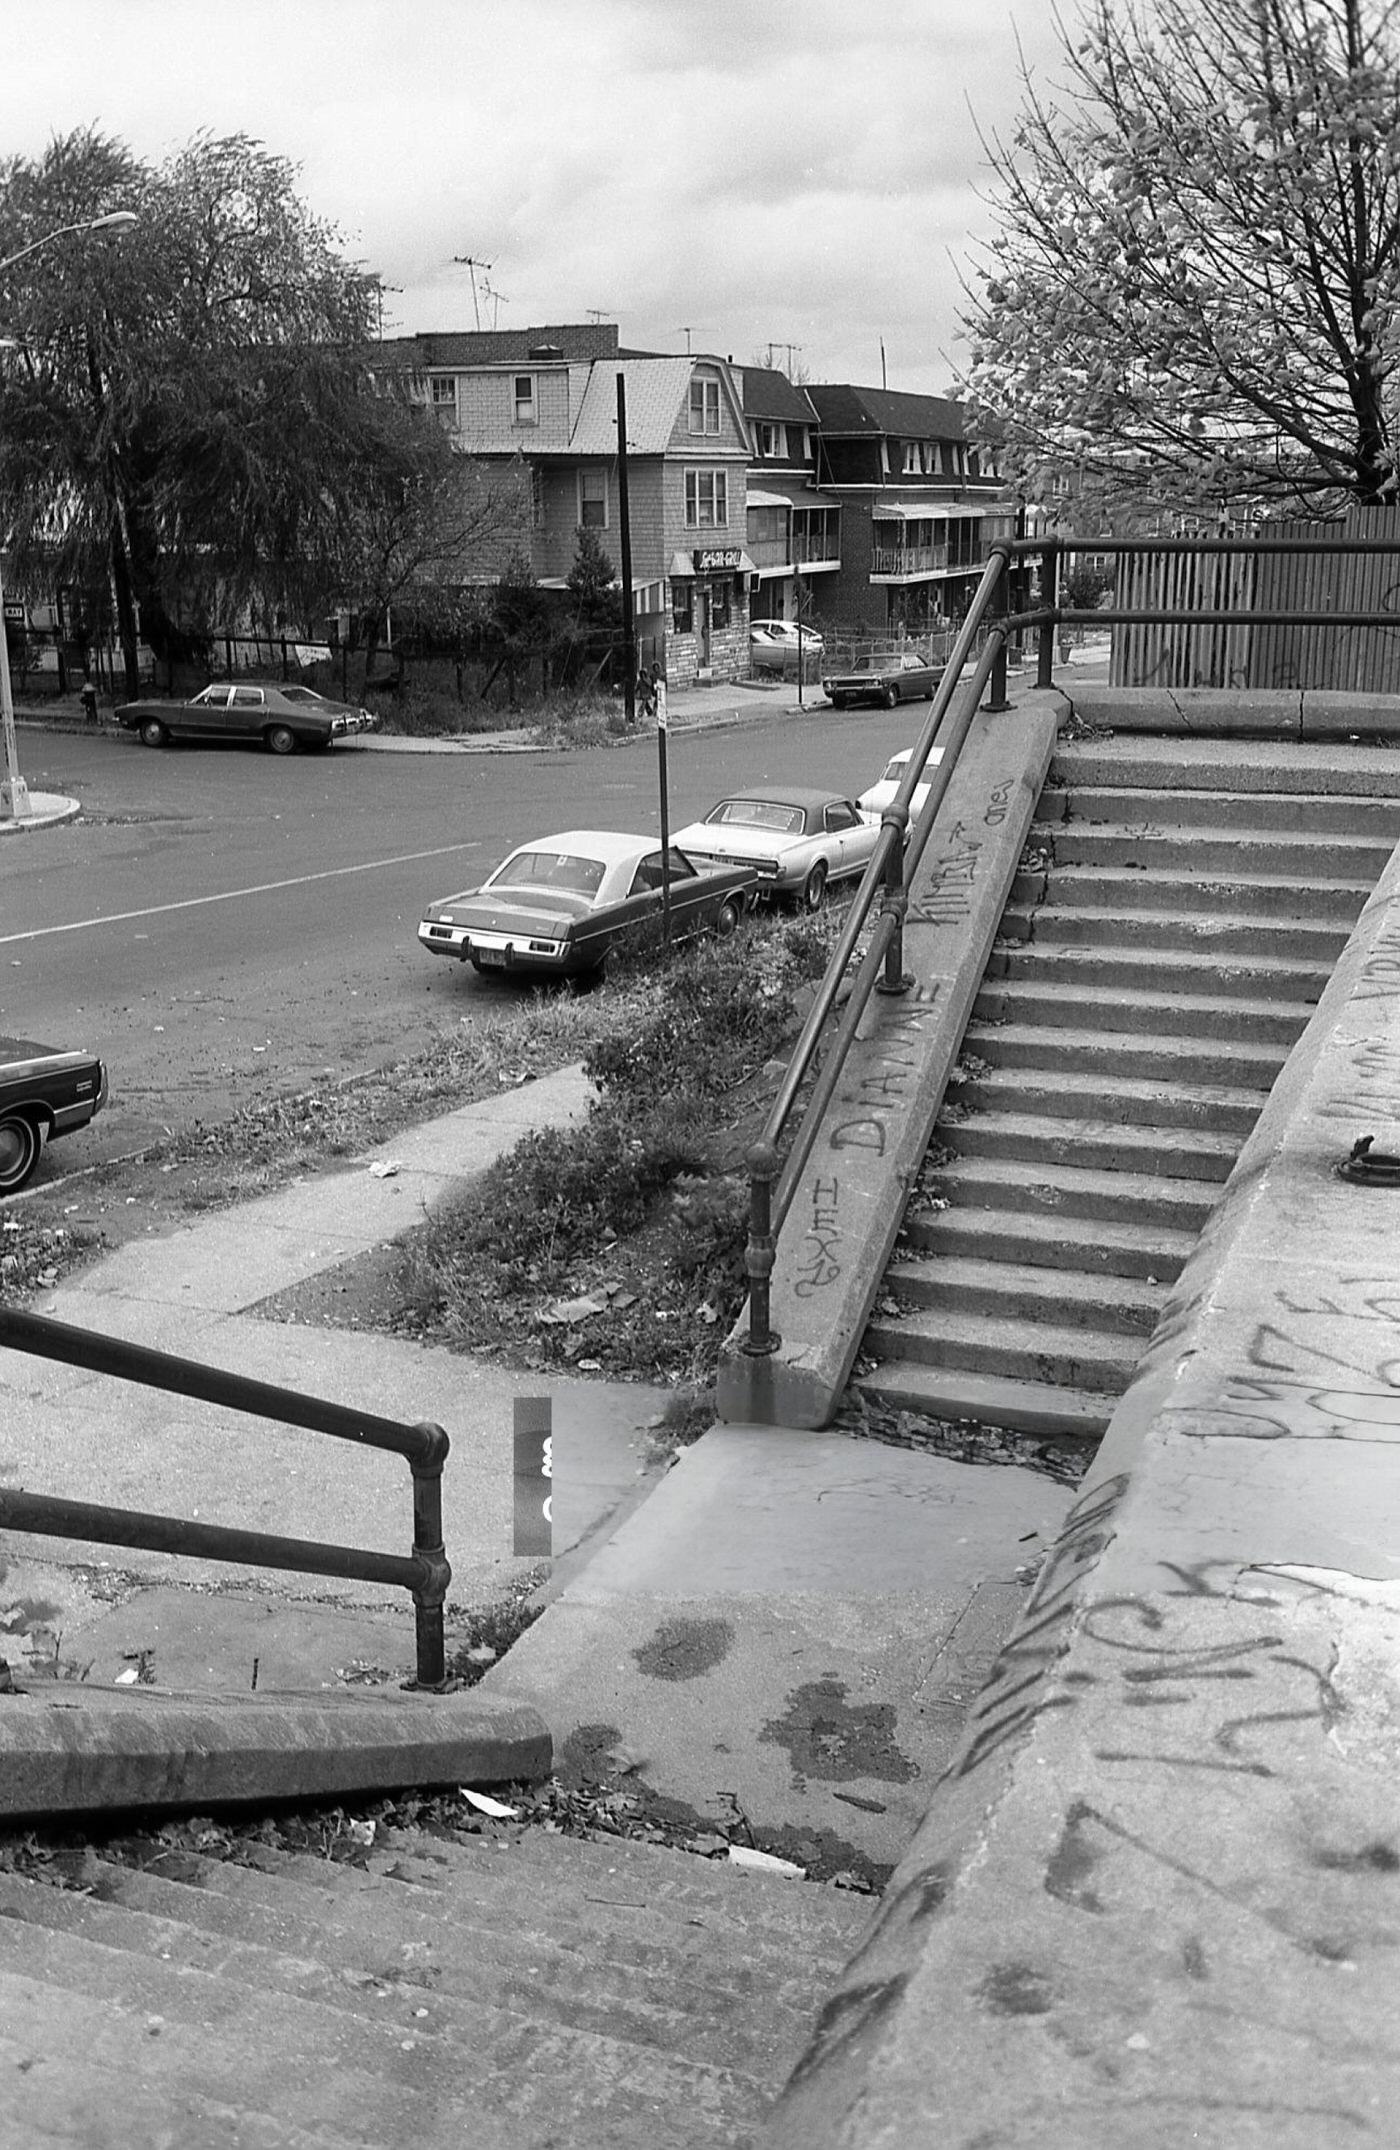 Graffiti-Covered Cement Staircases That Lead Down To 37Th Avenue In Queens' Corona Neighborhood, 1974.